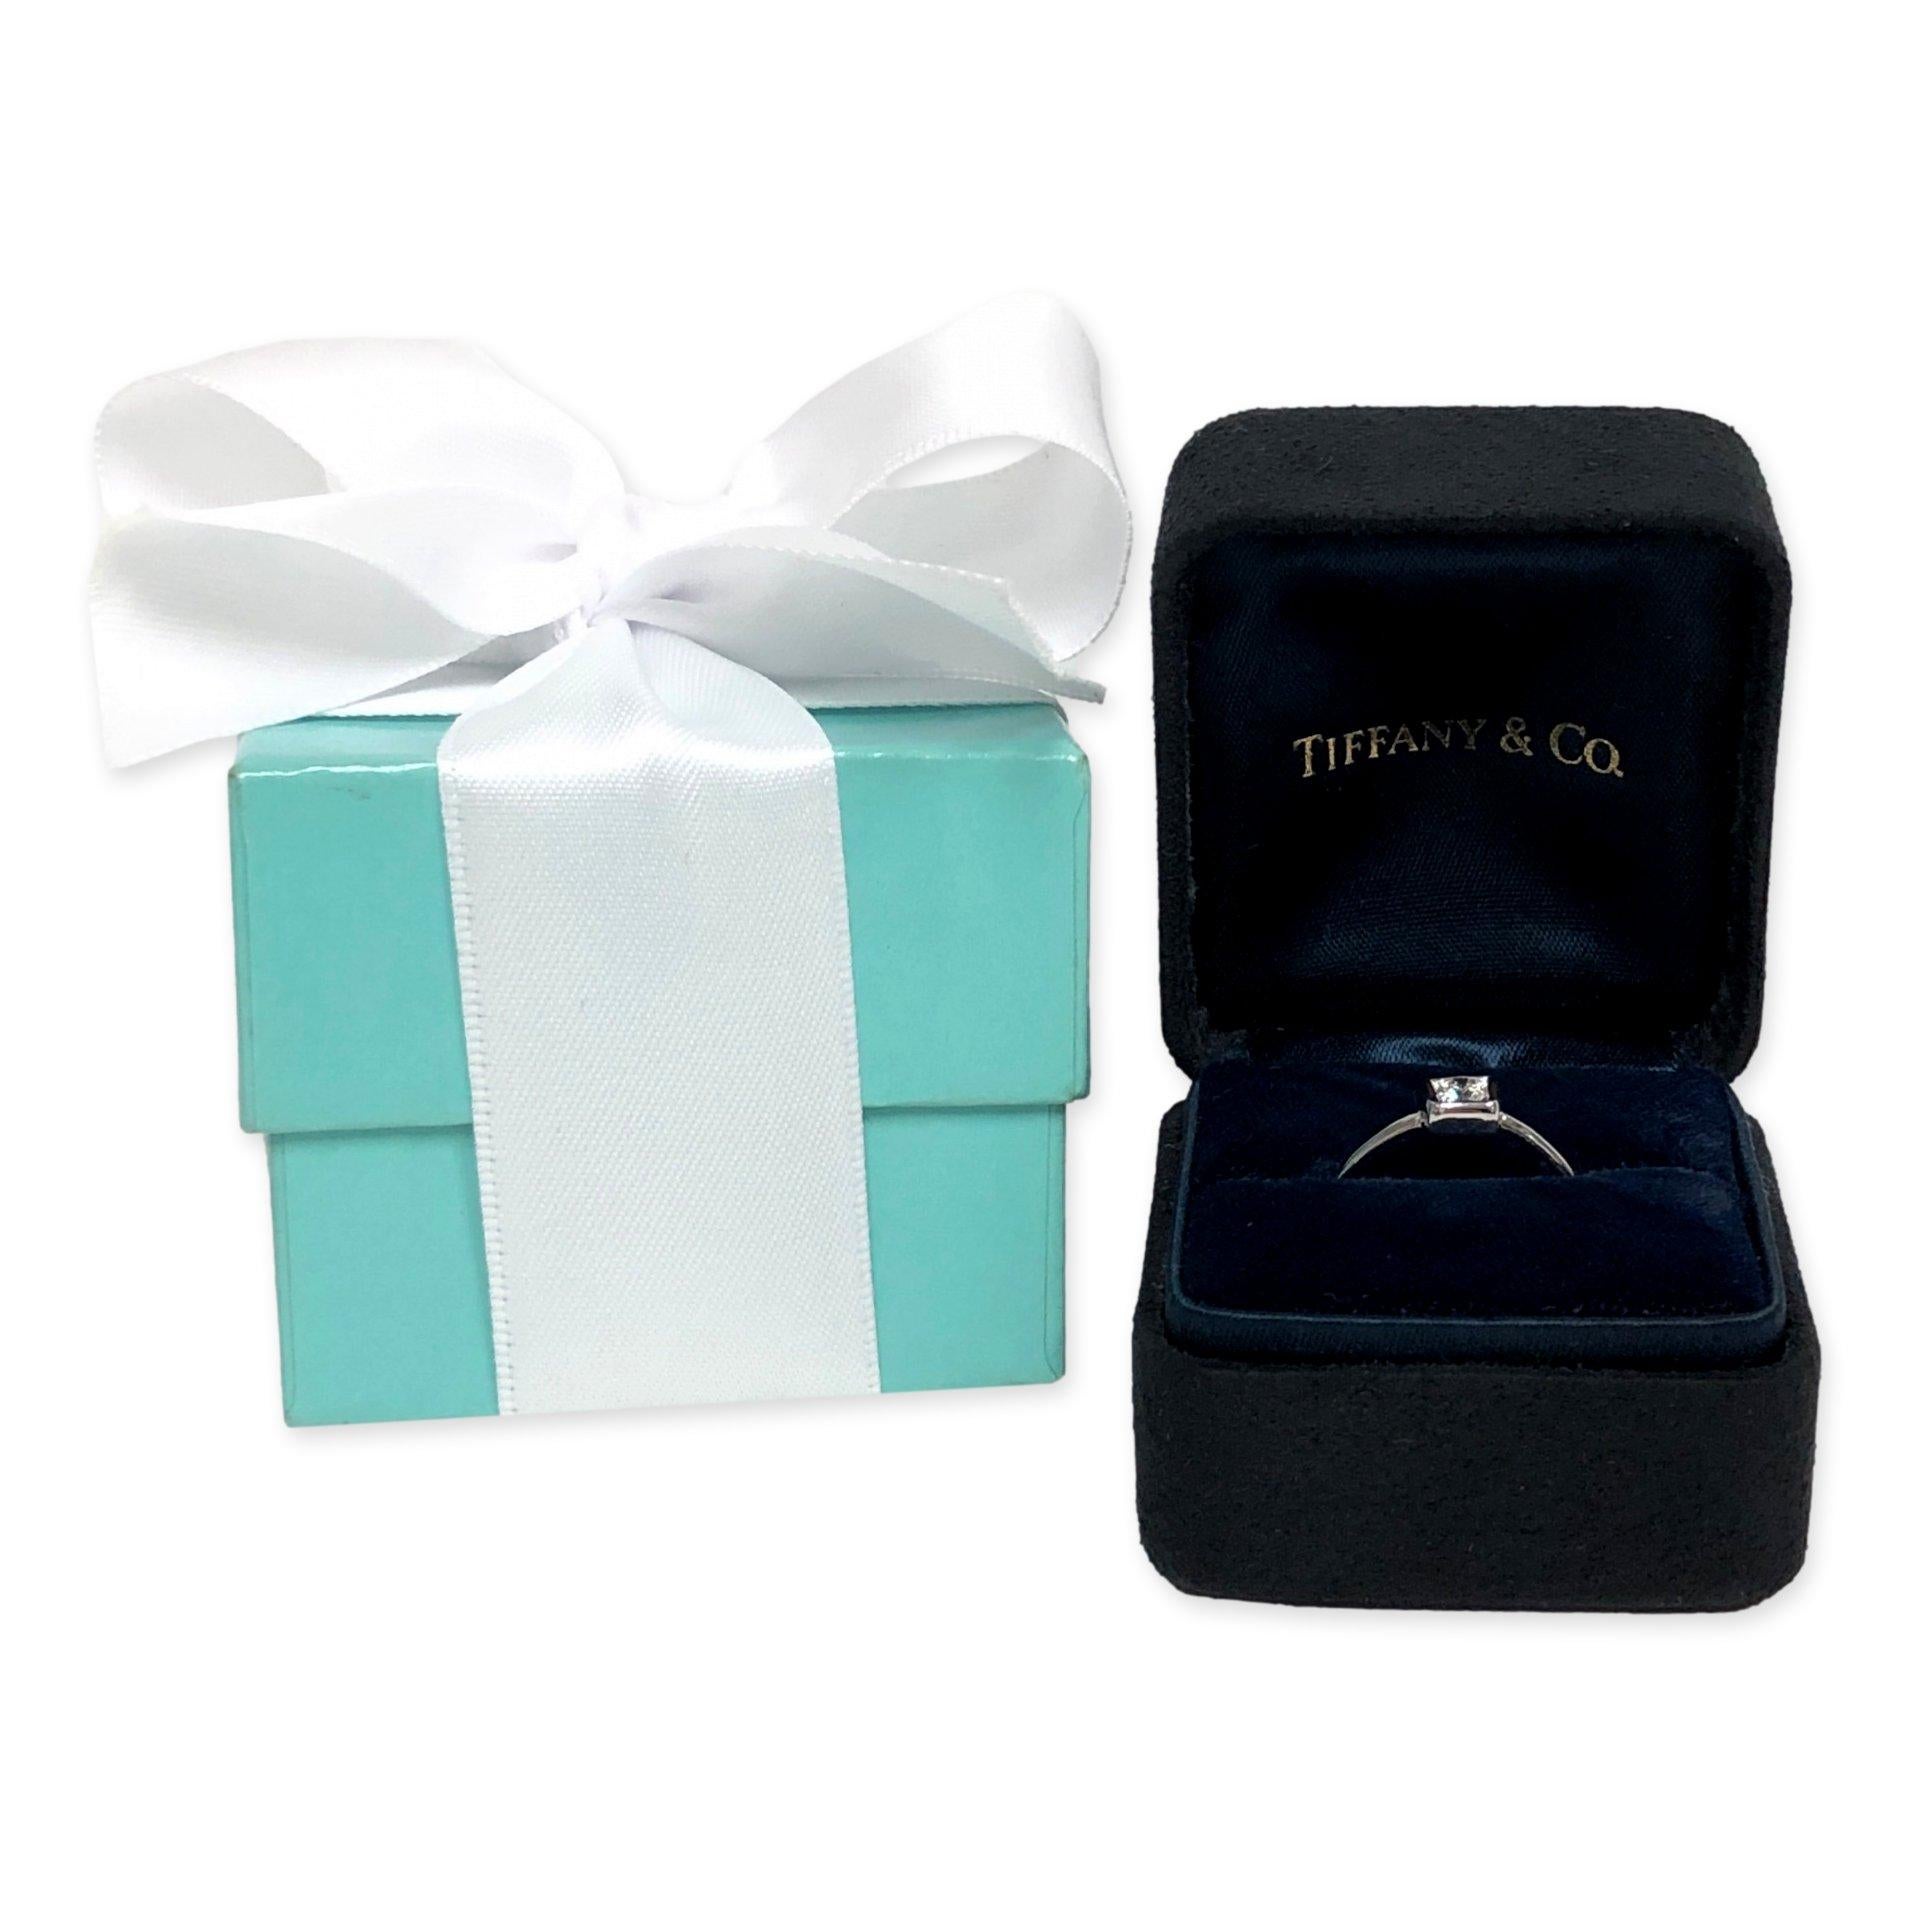 Tiffany and Co. 18K White Gold Frank Gehry 0.20 ct. Torque Square Diamond Ring 1